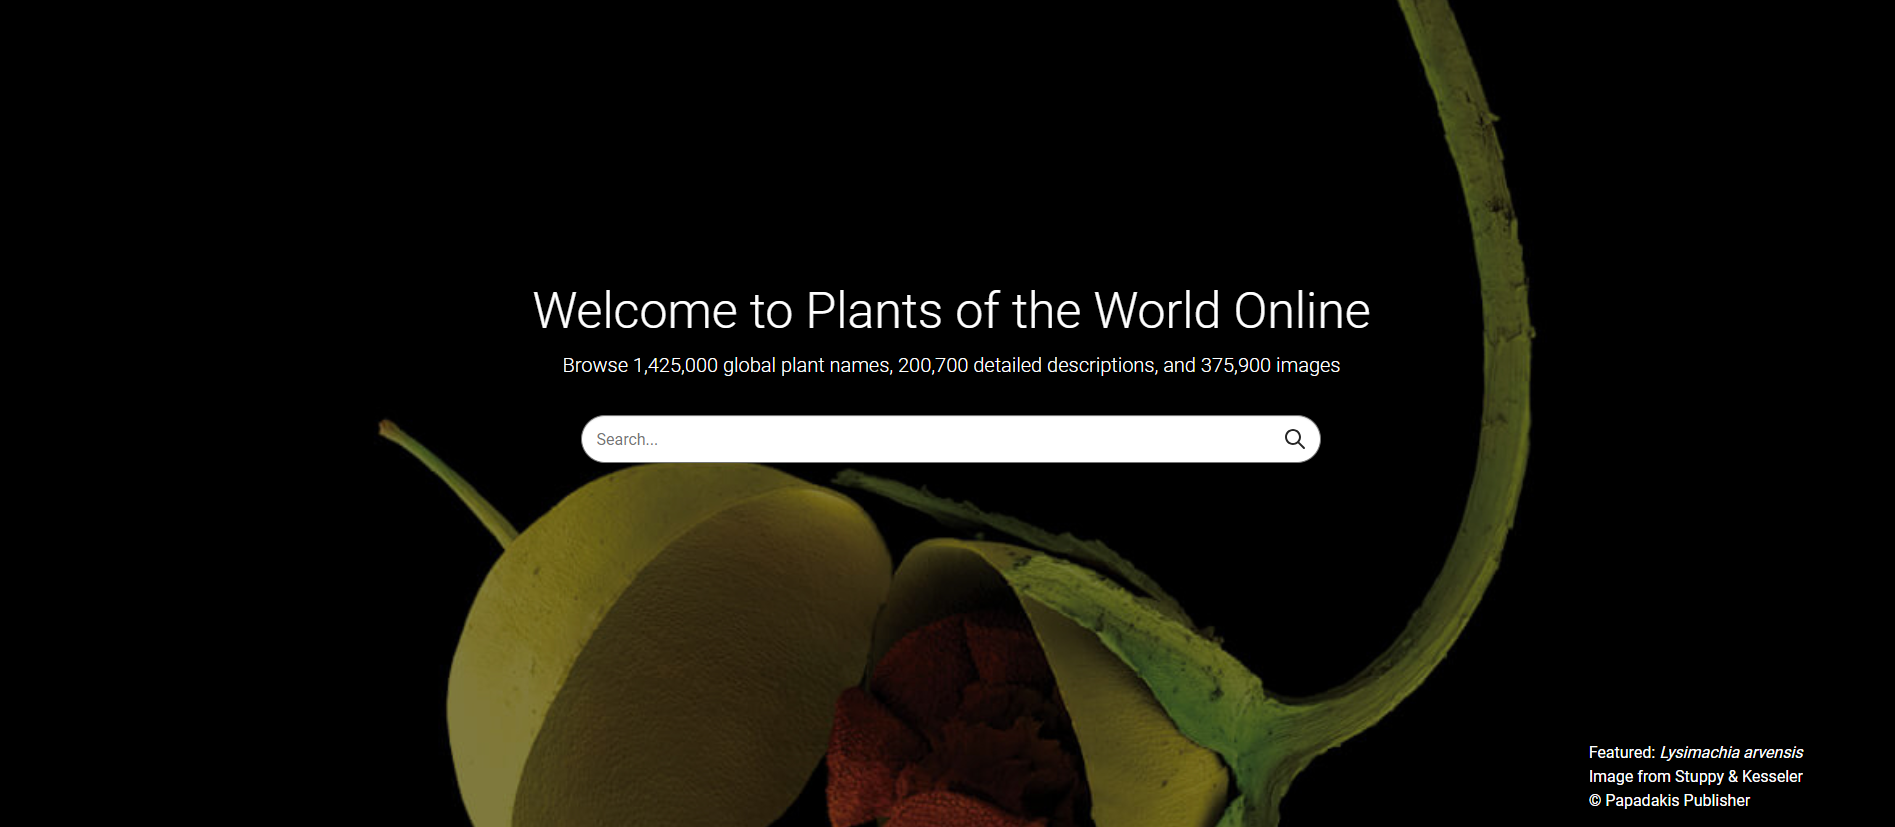 The POWO landing page features a searchbox and the text Visitors to the Plants of the World Online are greeted with an invitation to use one of the most valuable plant science resources in existence.